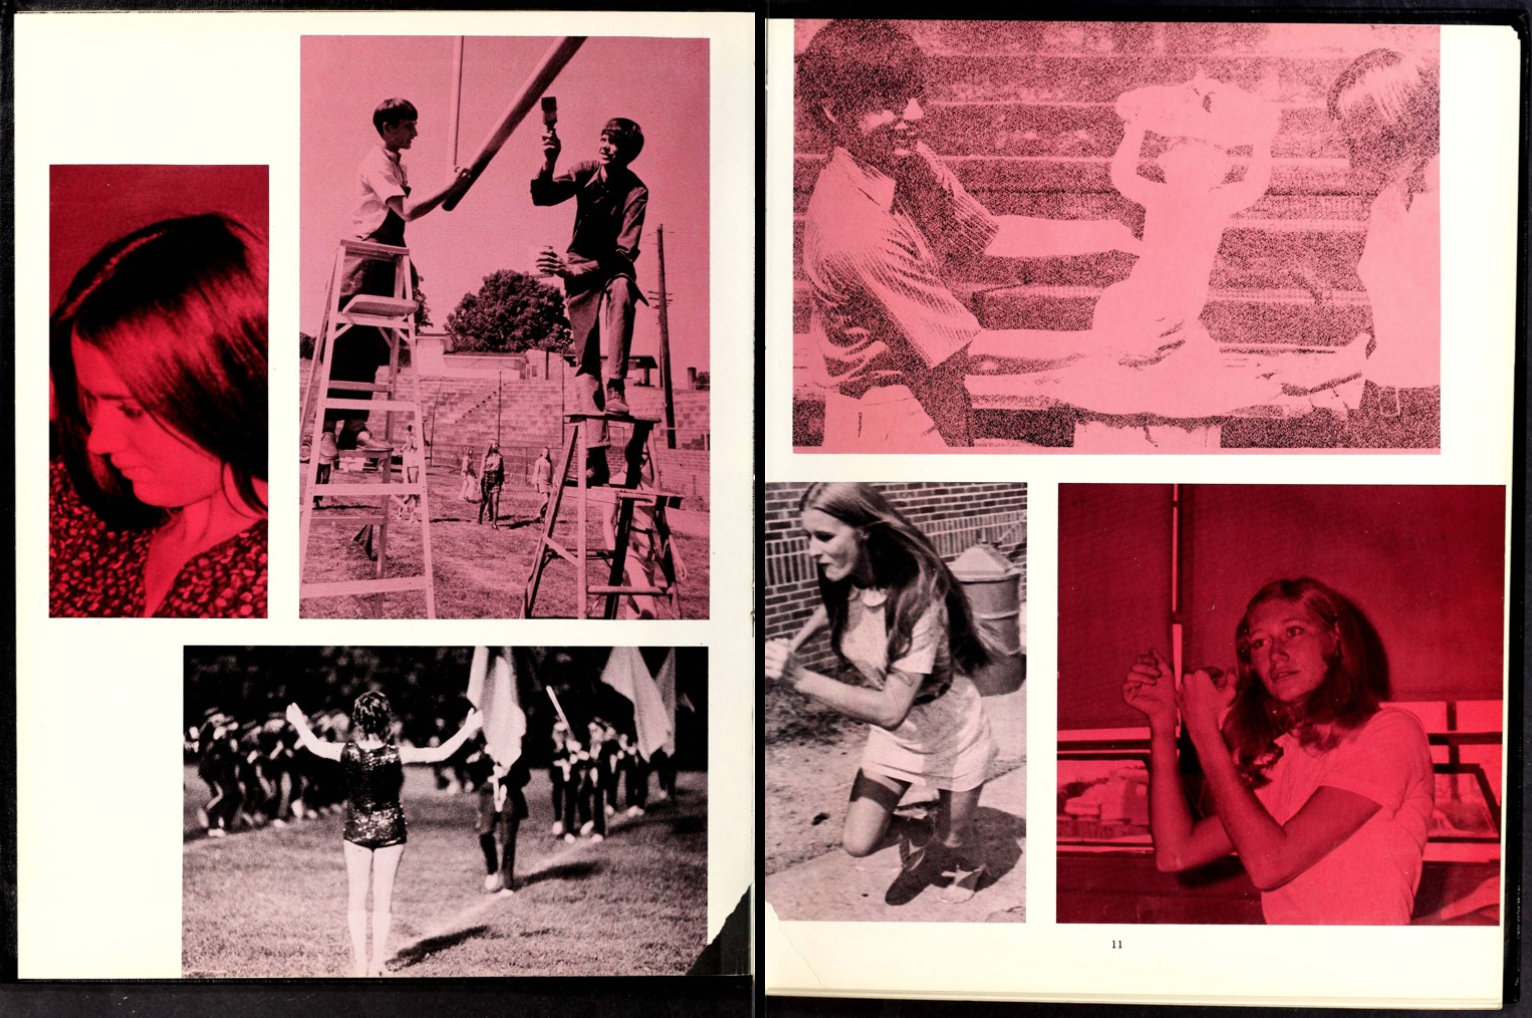 Two-page spread from the 1972 Granite Falls High School yearbook, The Granite Boulder. These two pages show candid photos taken during various events. All photos are in tones of pink.